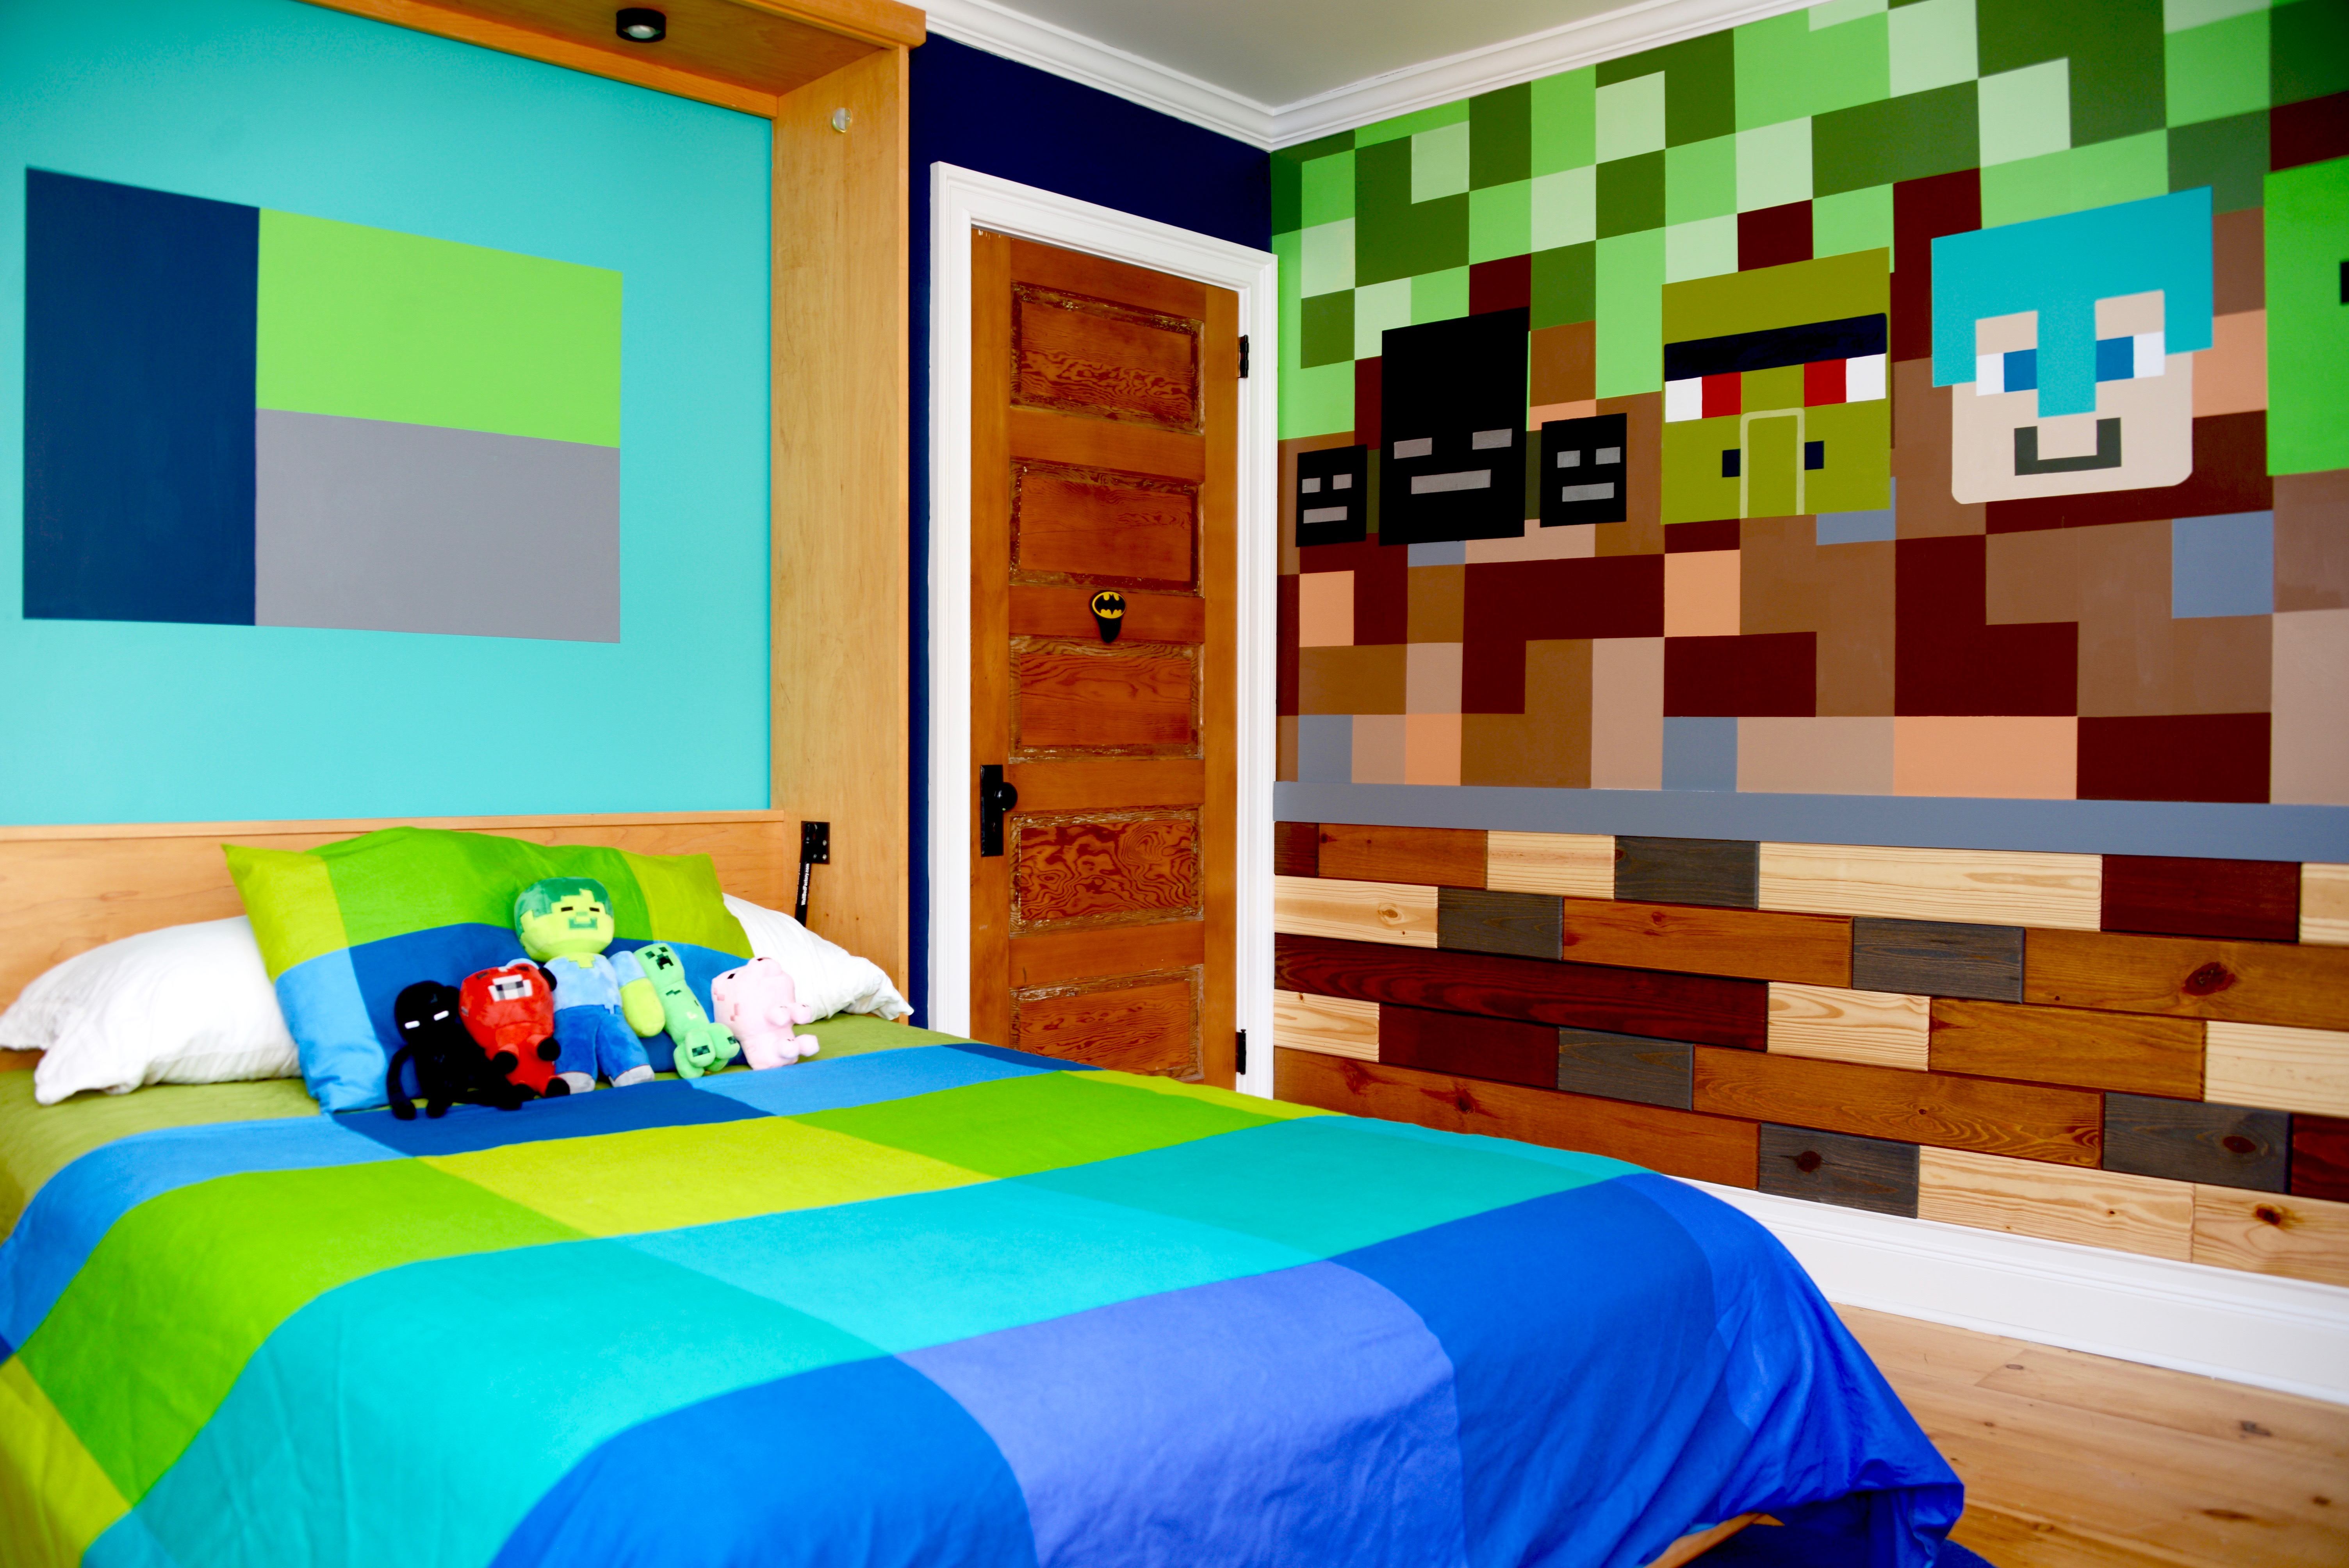 need a few minecraft ideas for your kid's bedroom? here's